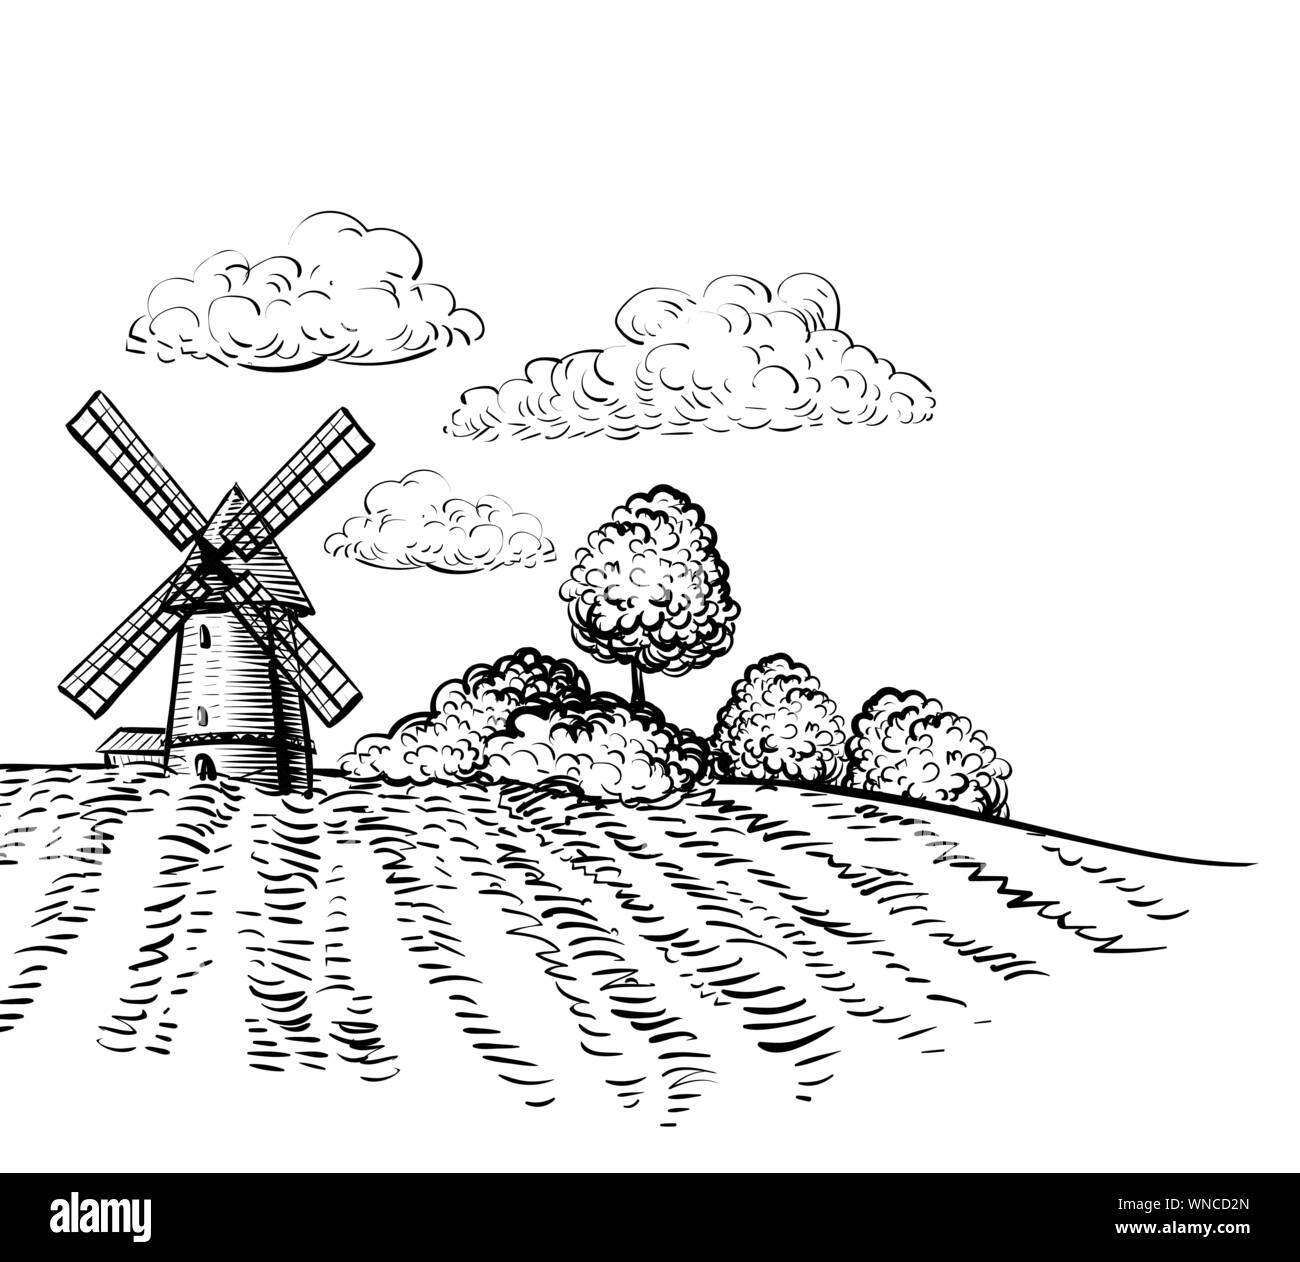 Windmill on agricultural field on background trees and rural landscape hand drawn sketch style illustration. Black and white rural farm landscape vector image Stock Vector